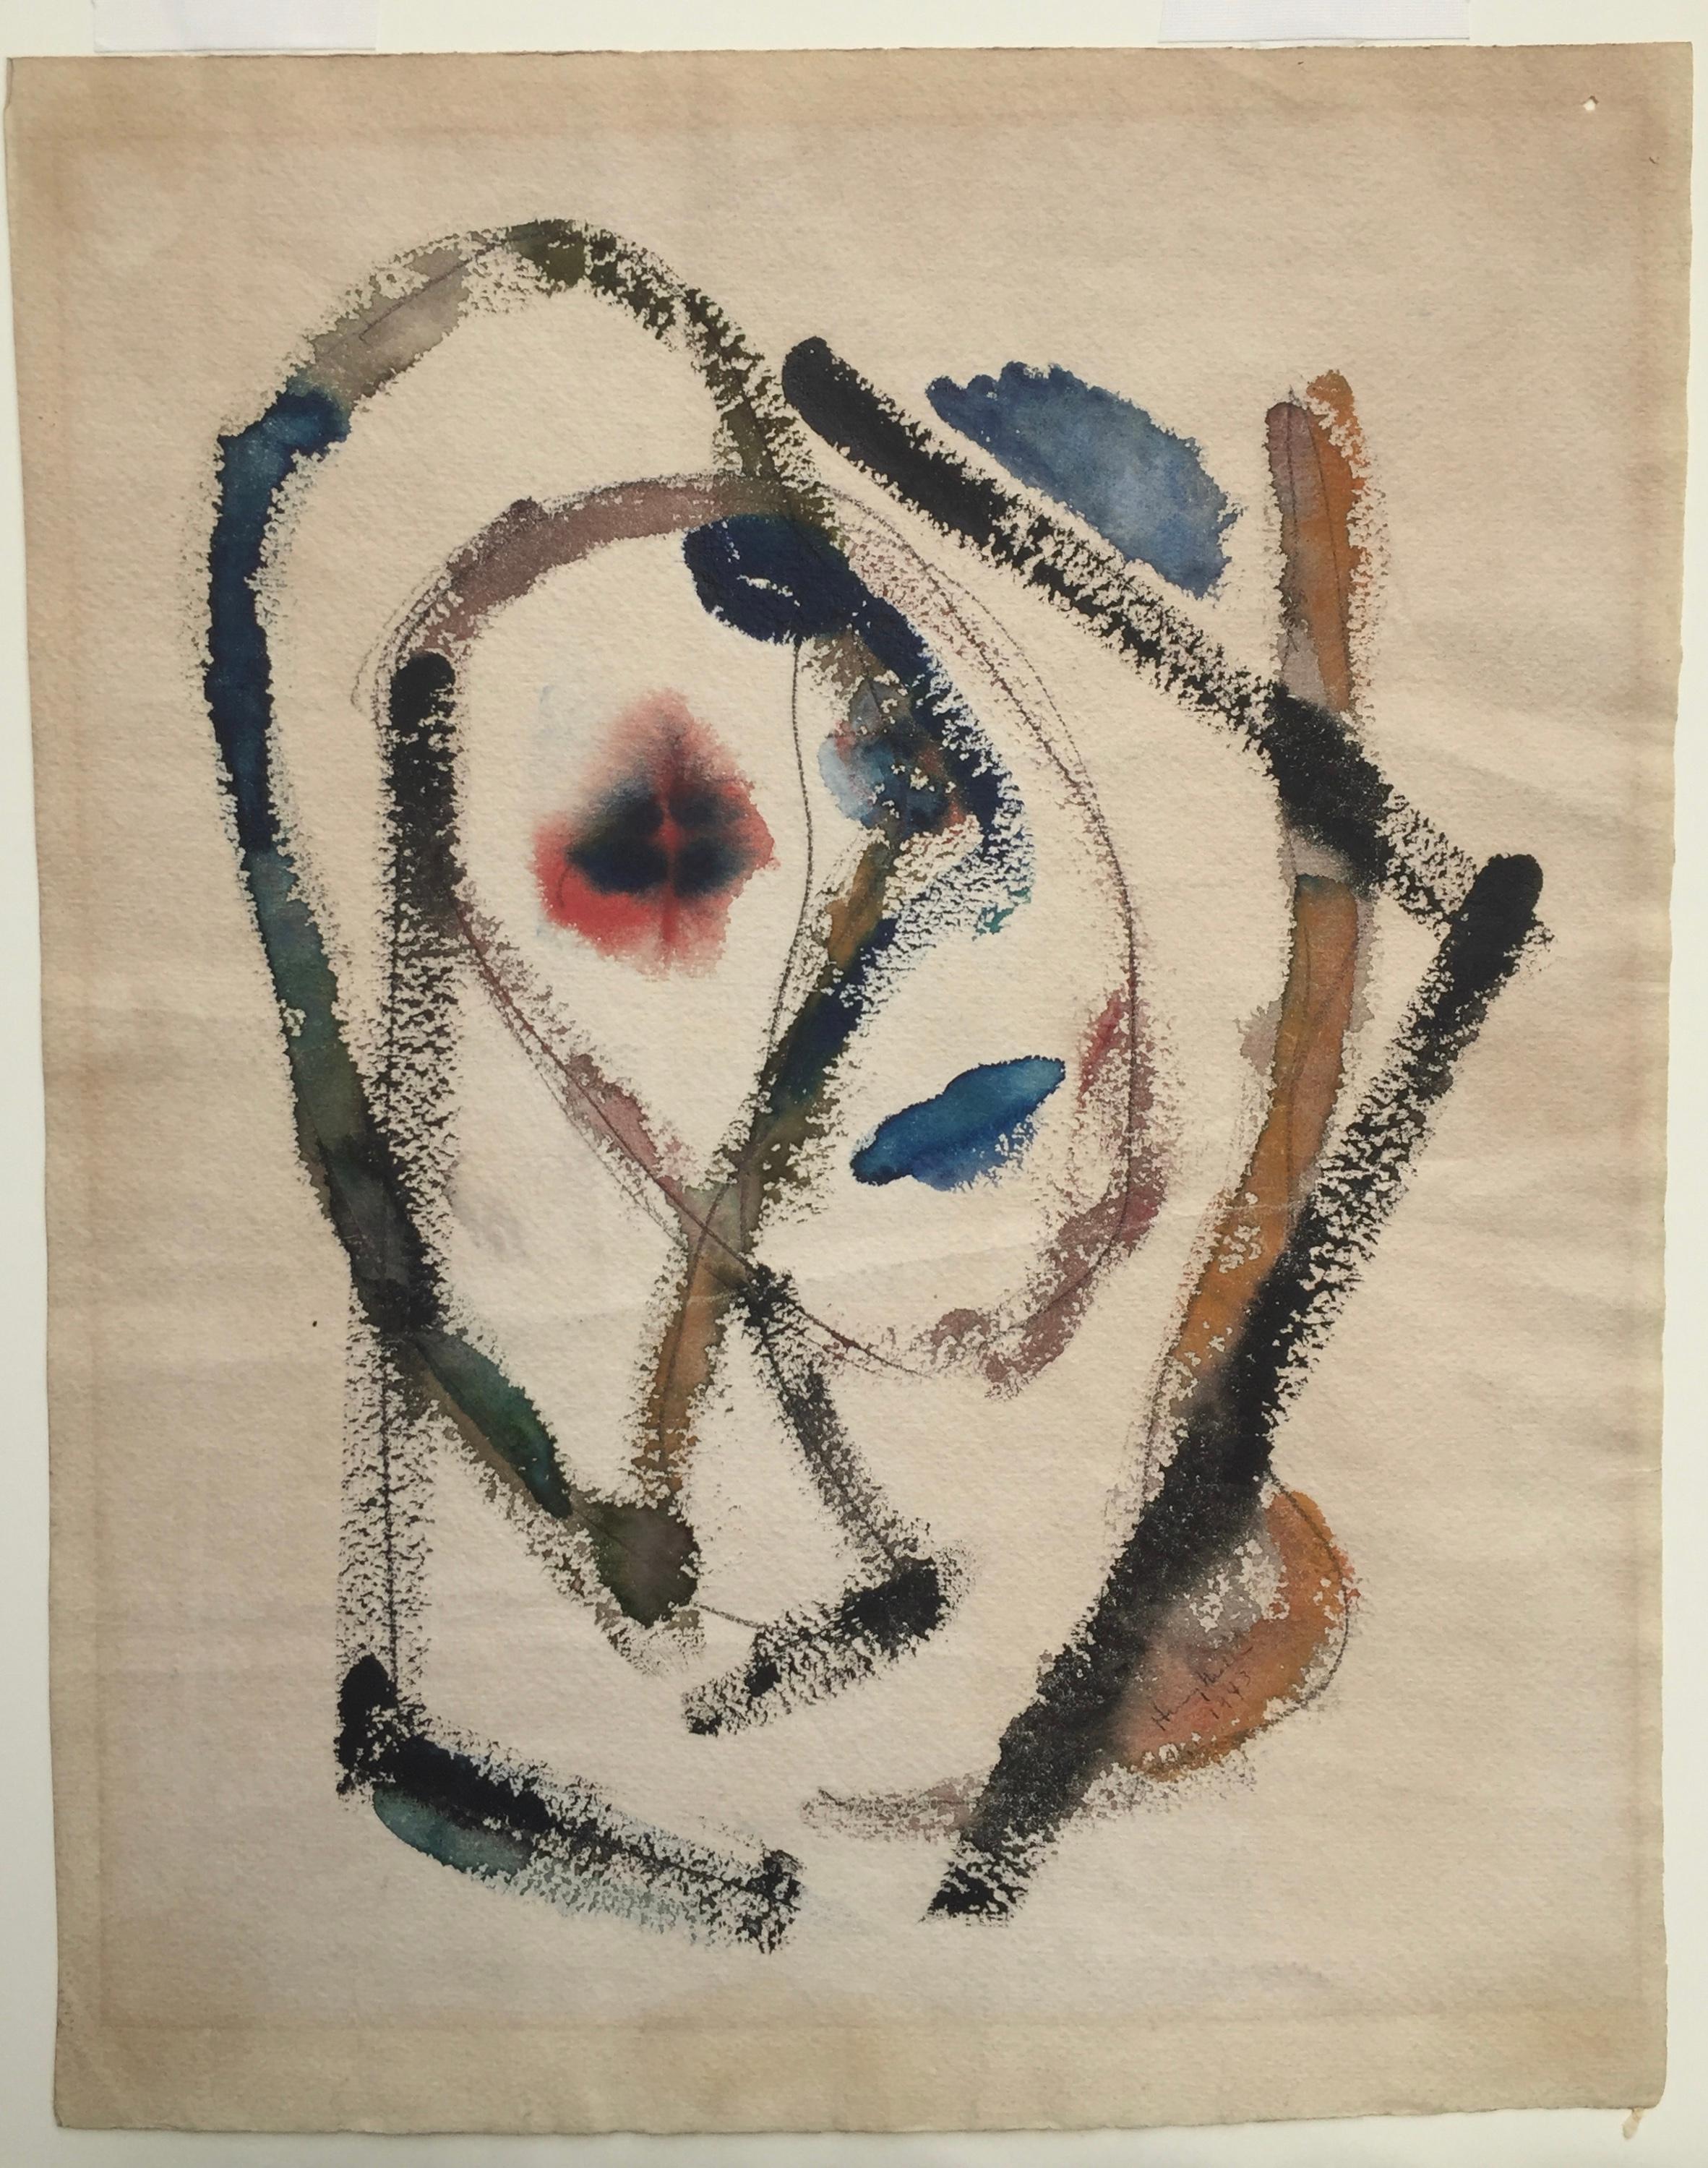 HENRY MILLER (1891 – 1980)
ABSTRACT PORTRAIT  - TARTE MELIA, 1943
Watercolor and gouache,  13” x 10 1/4” Signed and dated in pen. Irregular sheet, 15 1/2 x  12 ¼”. Henry Miller, author of Tropic of Cancer, Tropic of Capricorn, Black Spring, among